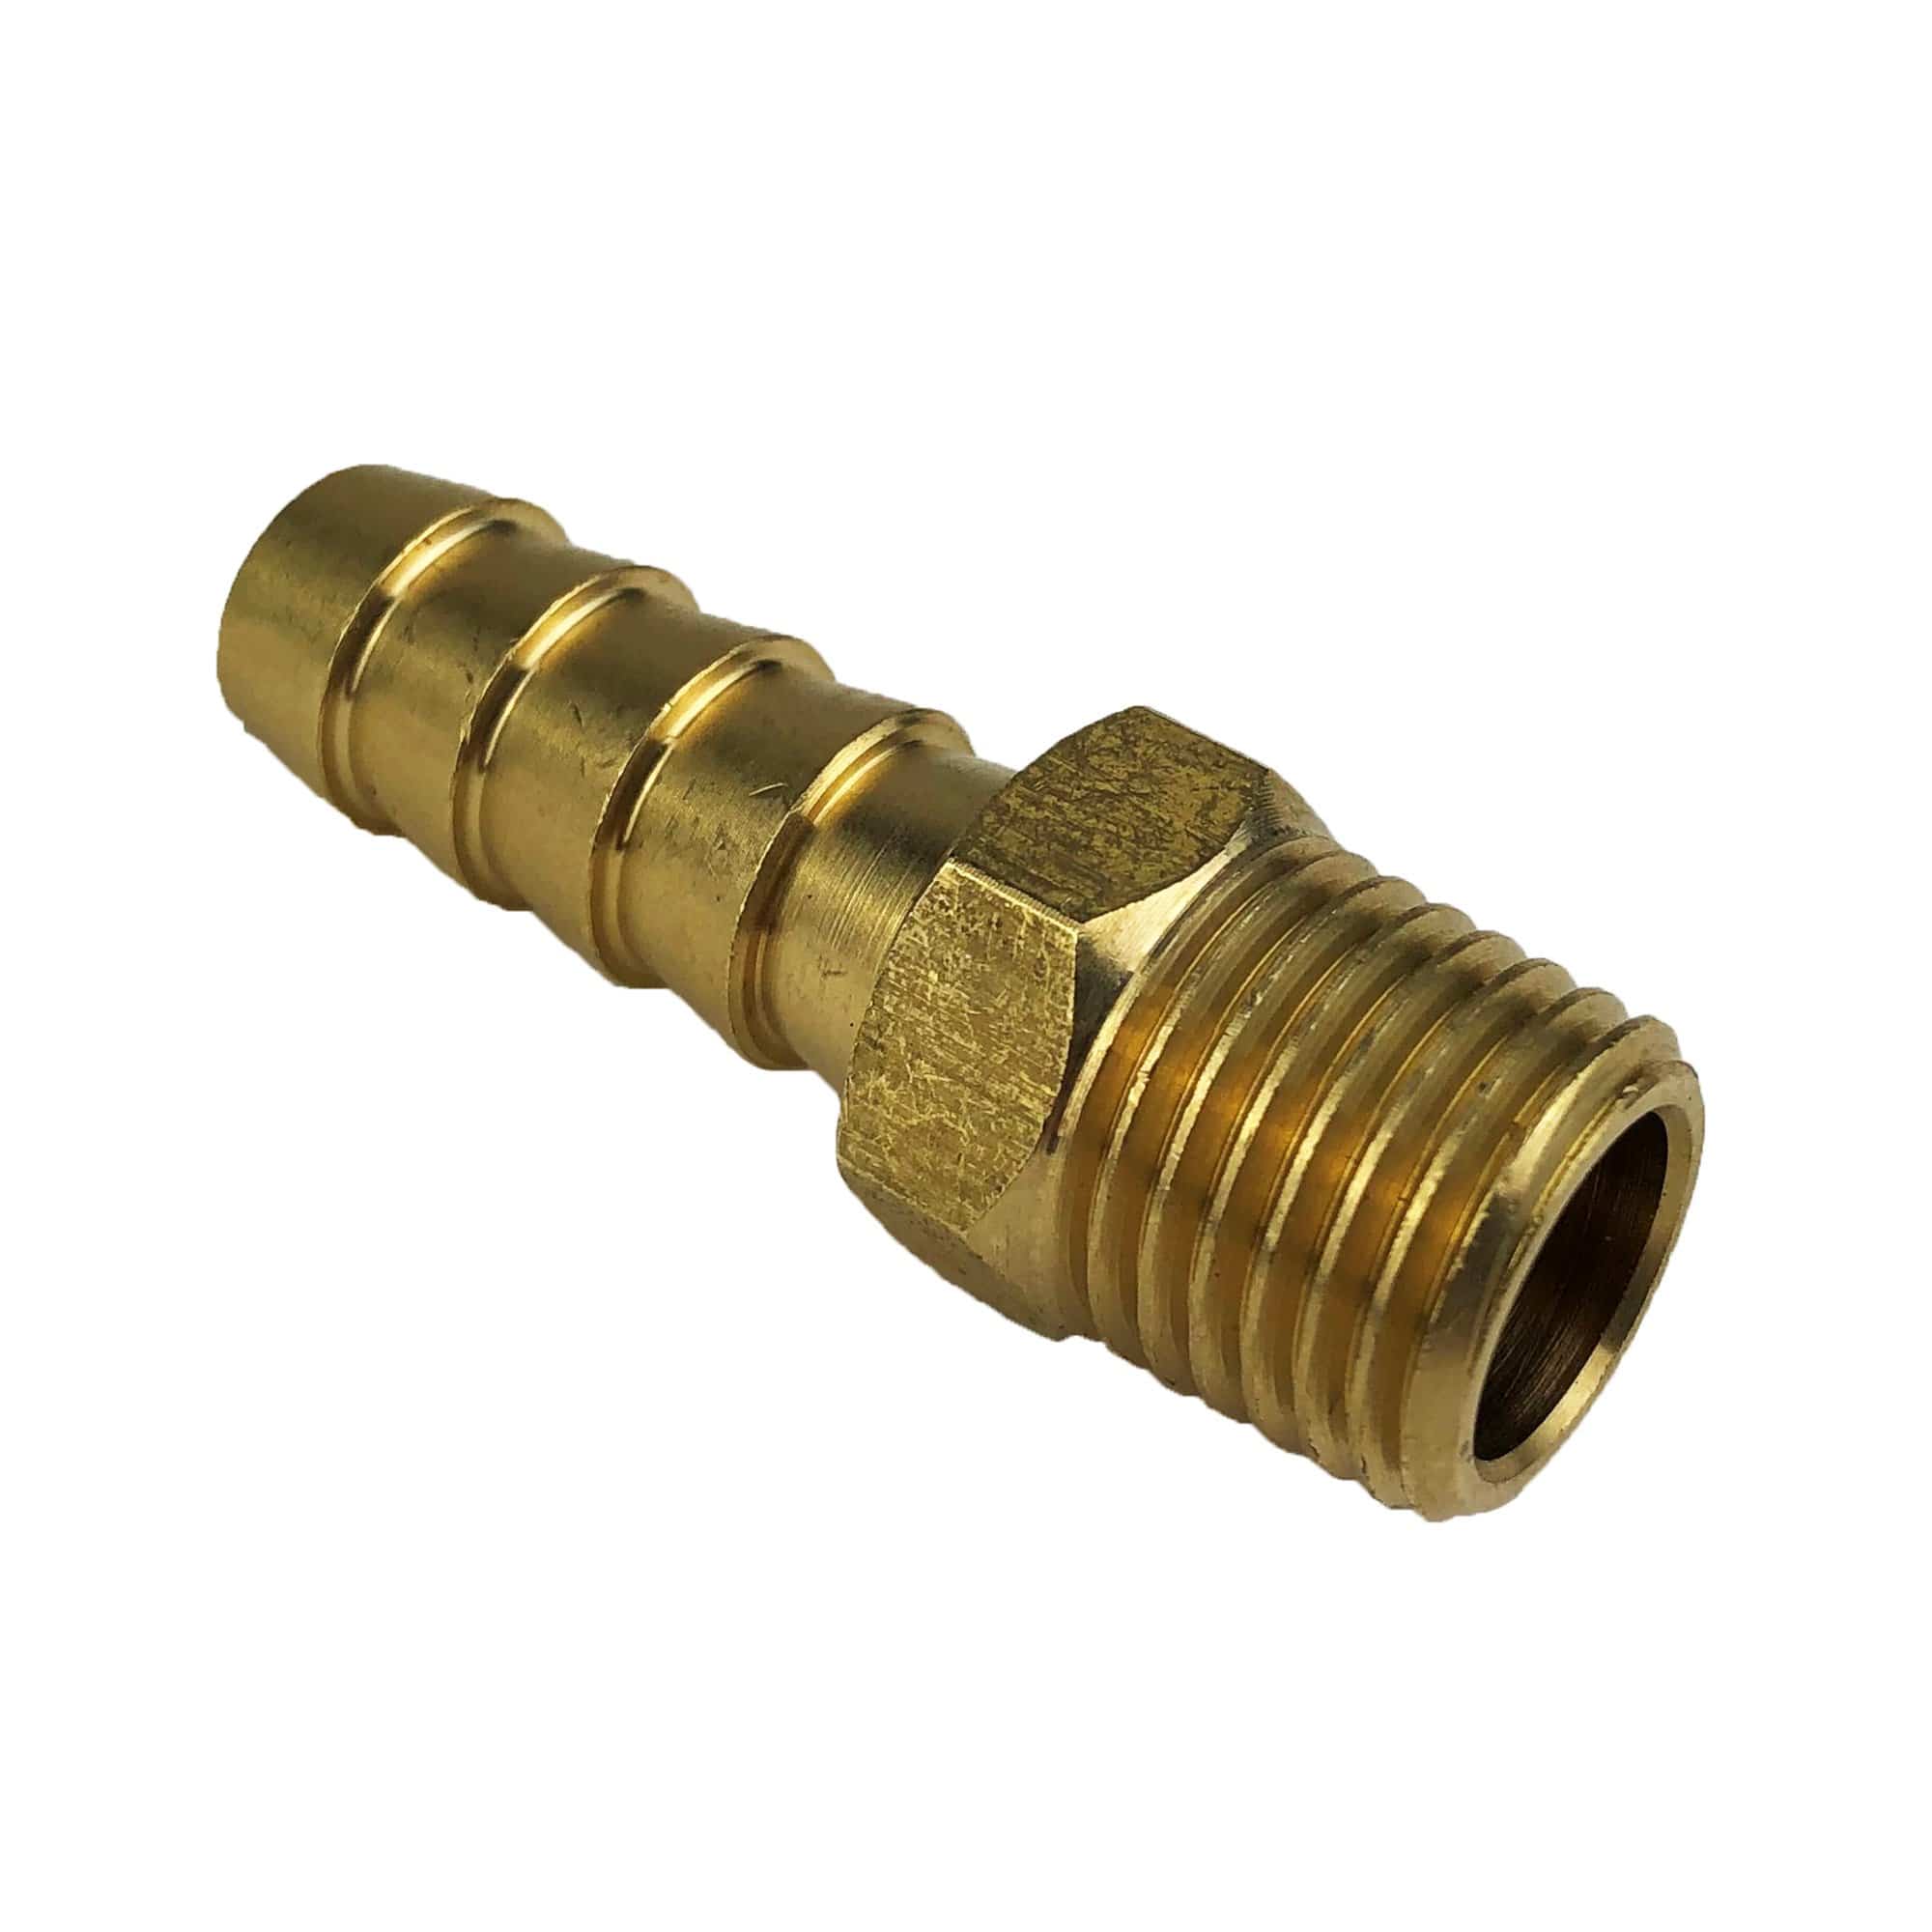 Attwood 14540-6 Fuel Connector, 1/4" NPT, 3/8" Barb Hose Fitting